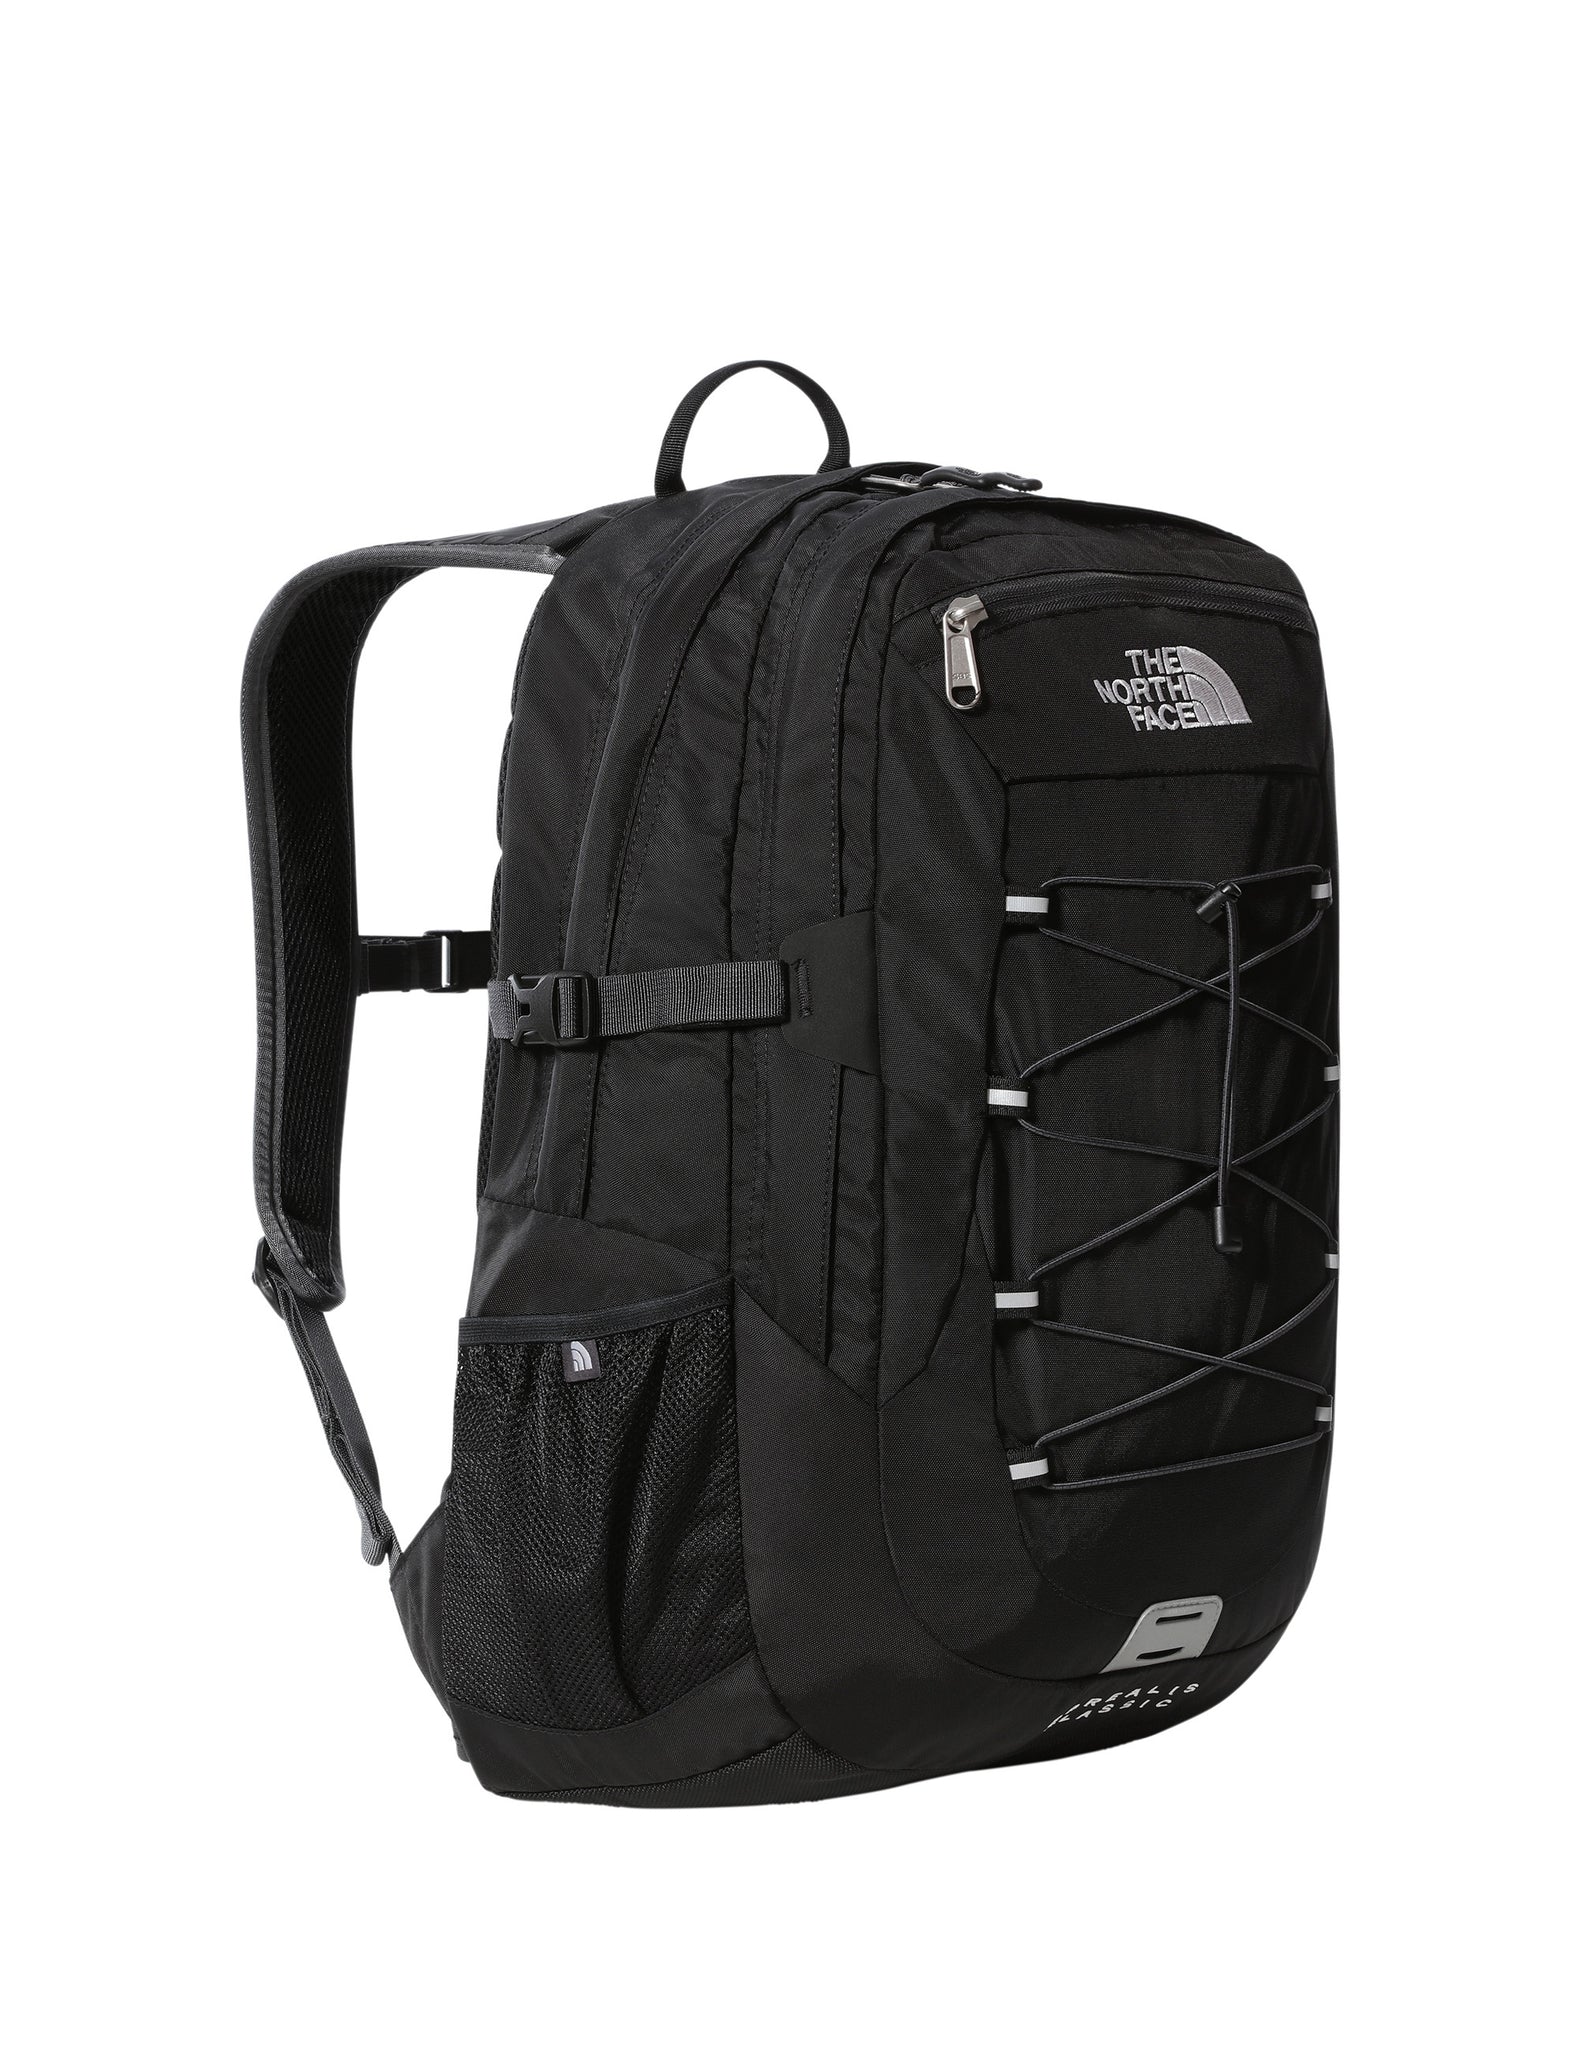 The North Face Borealis Classic Black Backpack